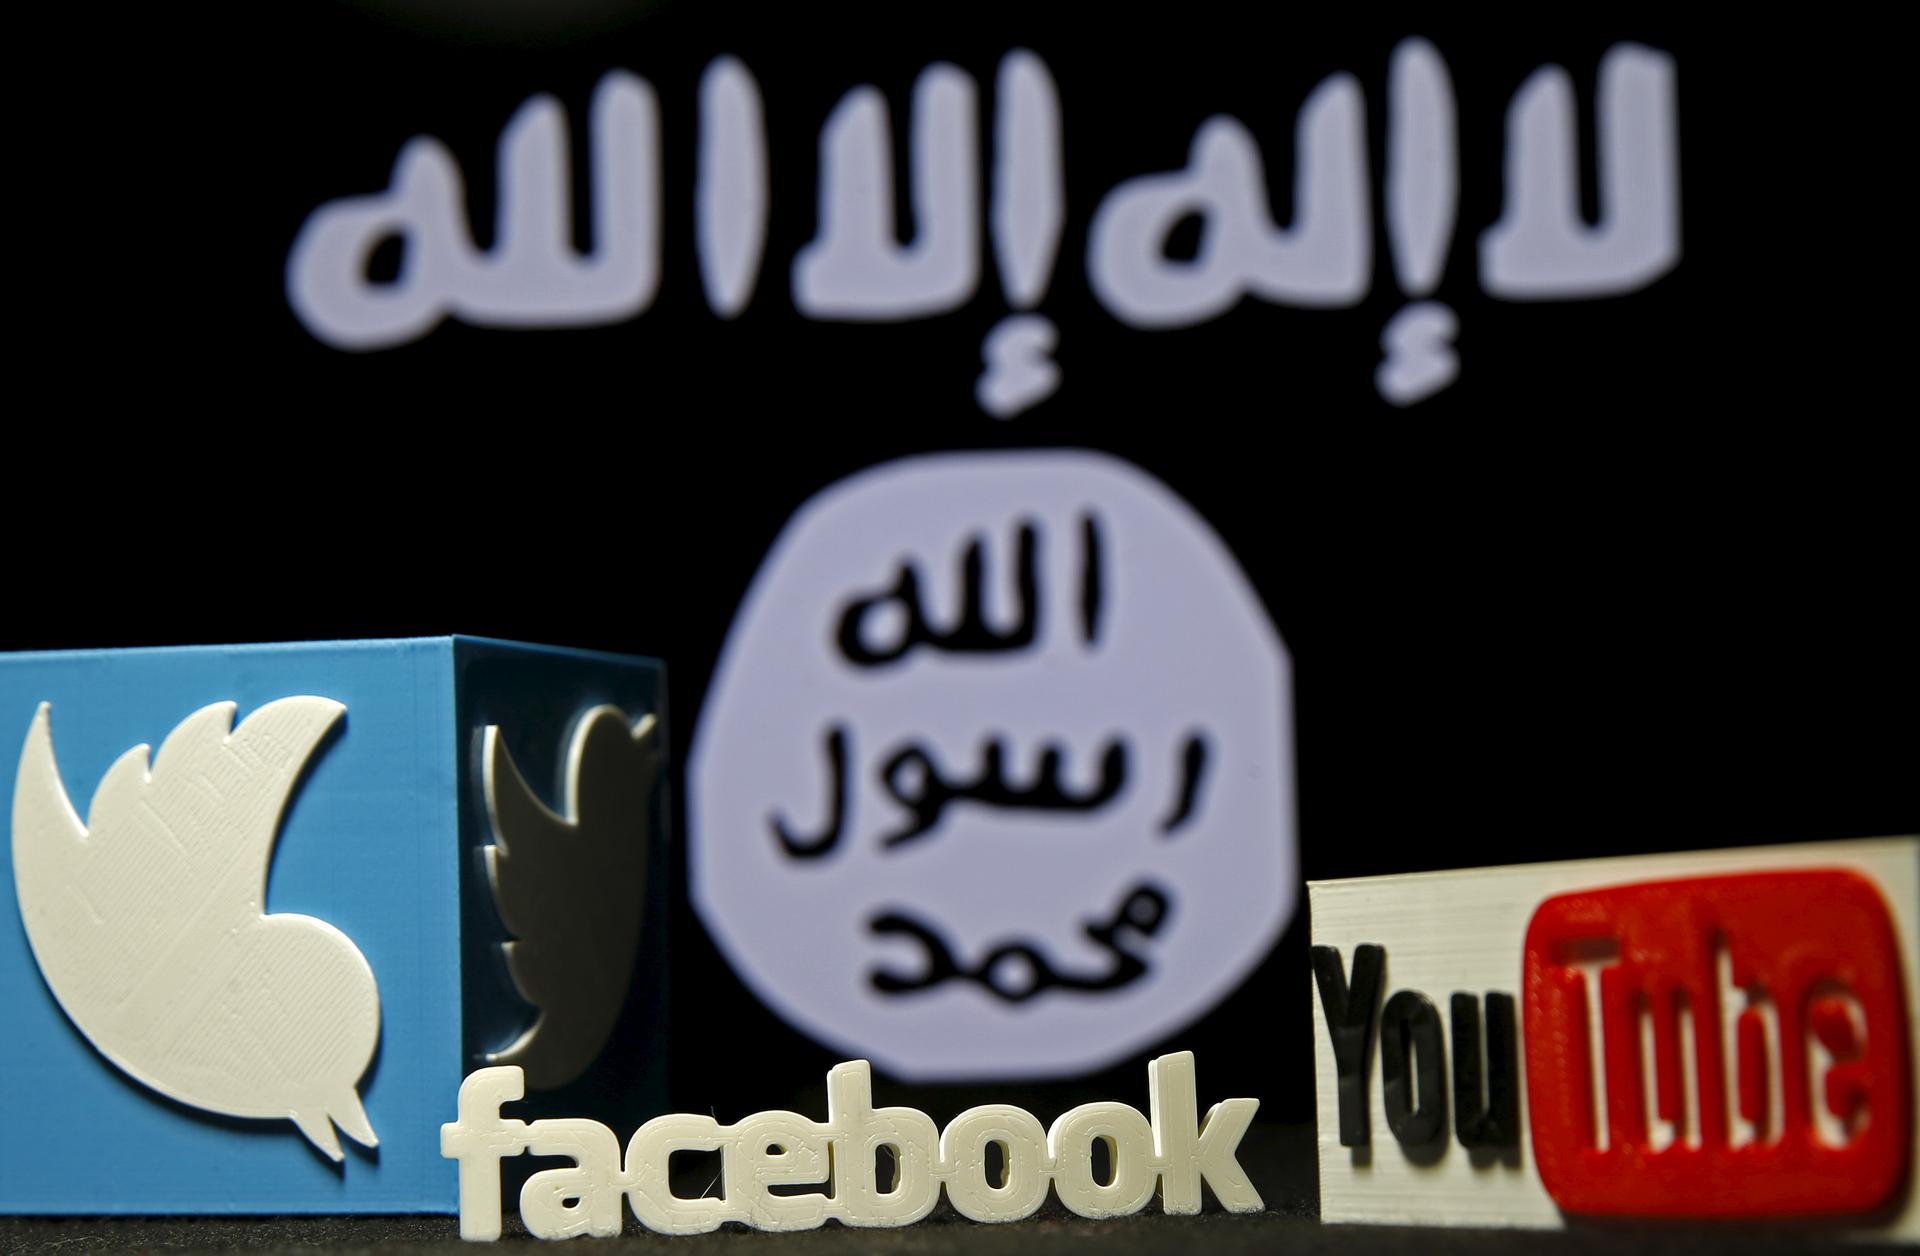 The ISIS flag next to symbols of Twitter and Facebook